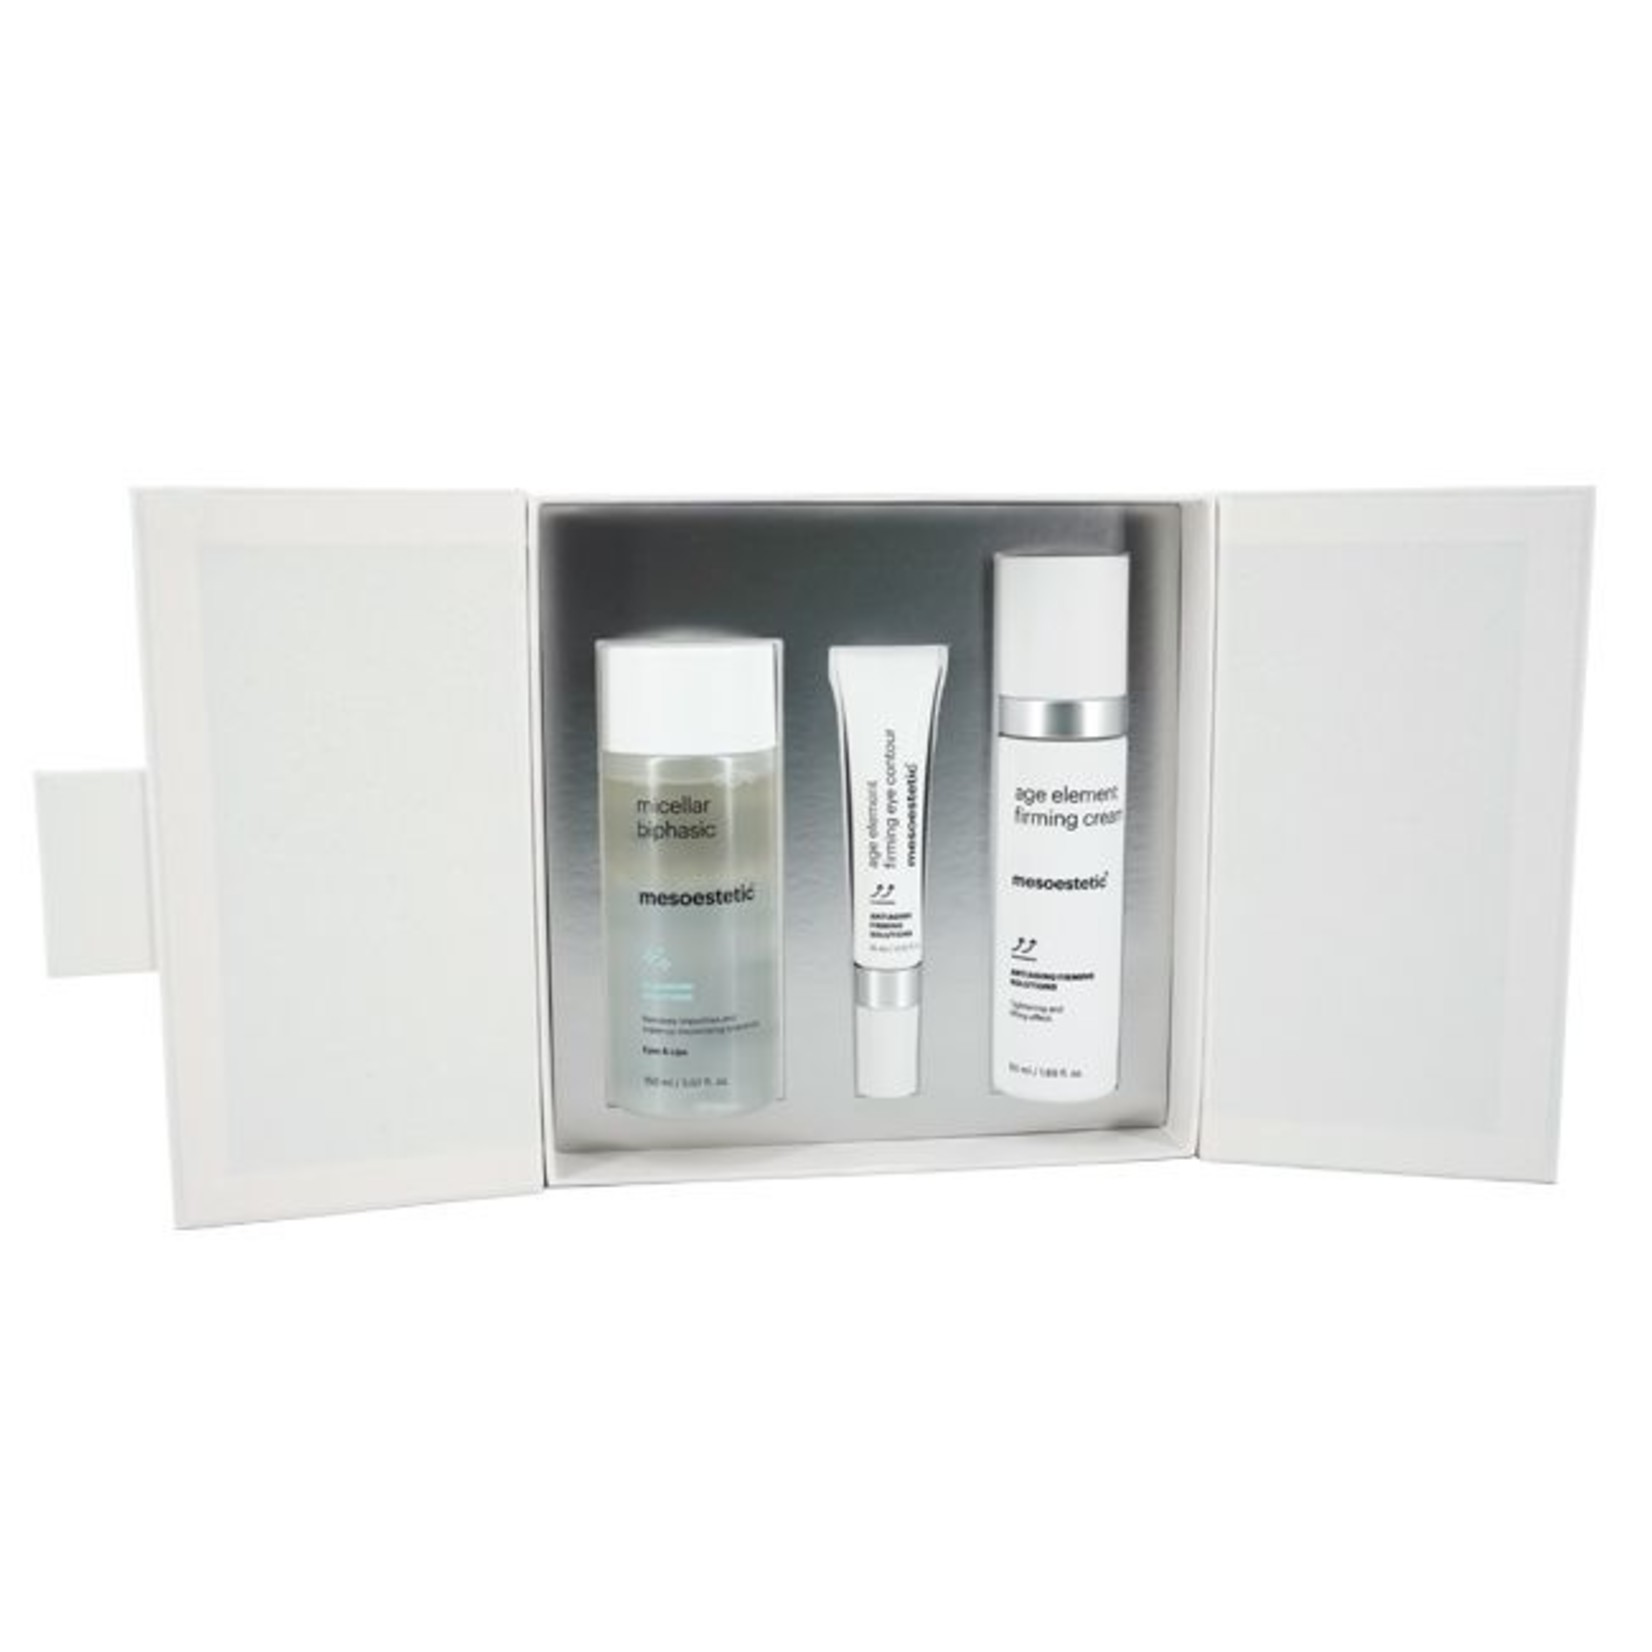 MESOESTETIC Lifting Pack Giftset